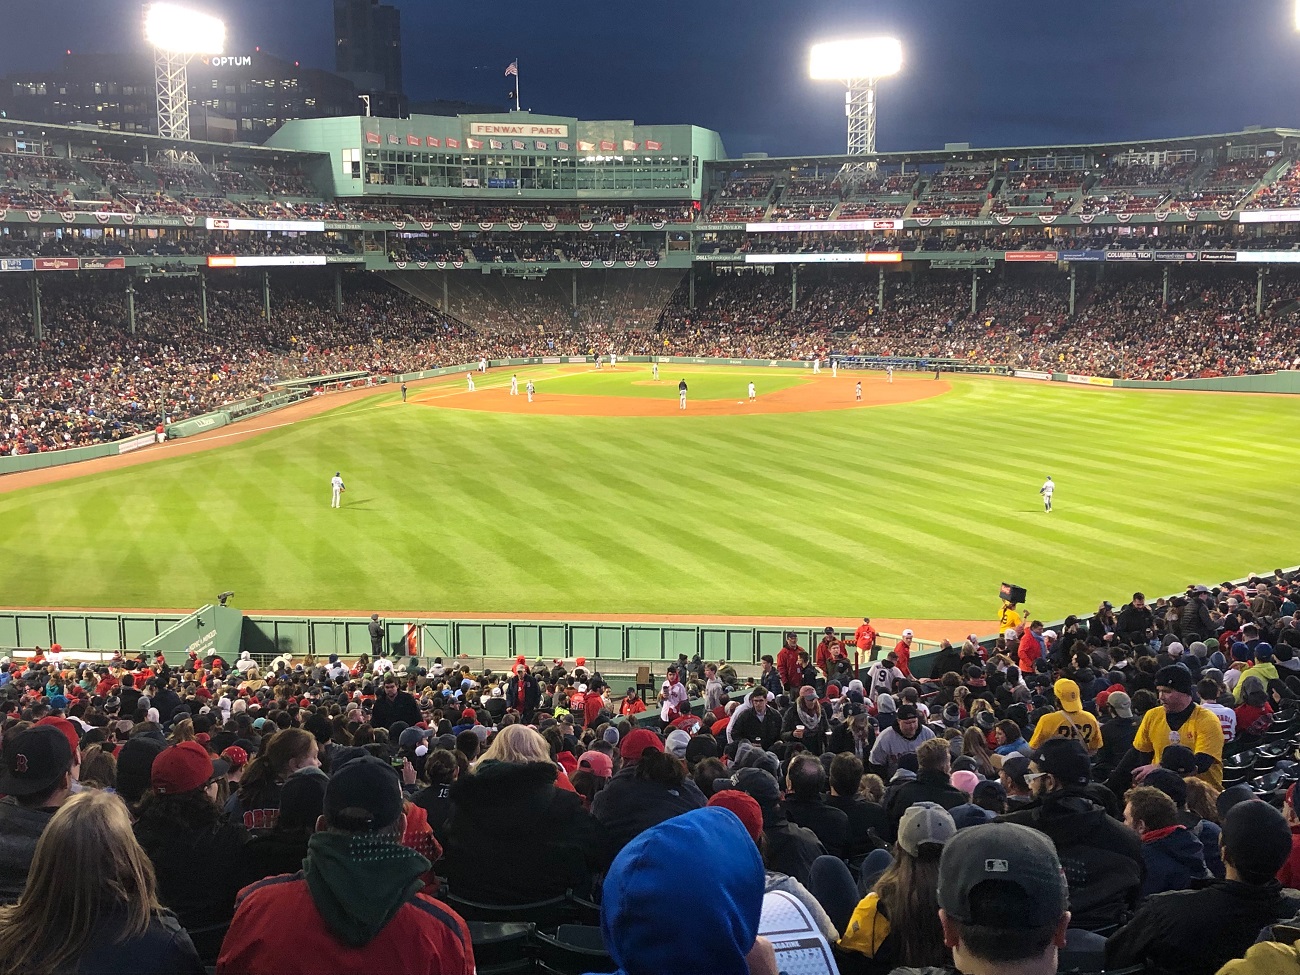 Night Game at Fenway Park